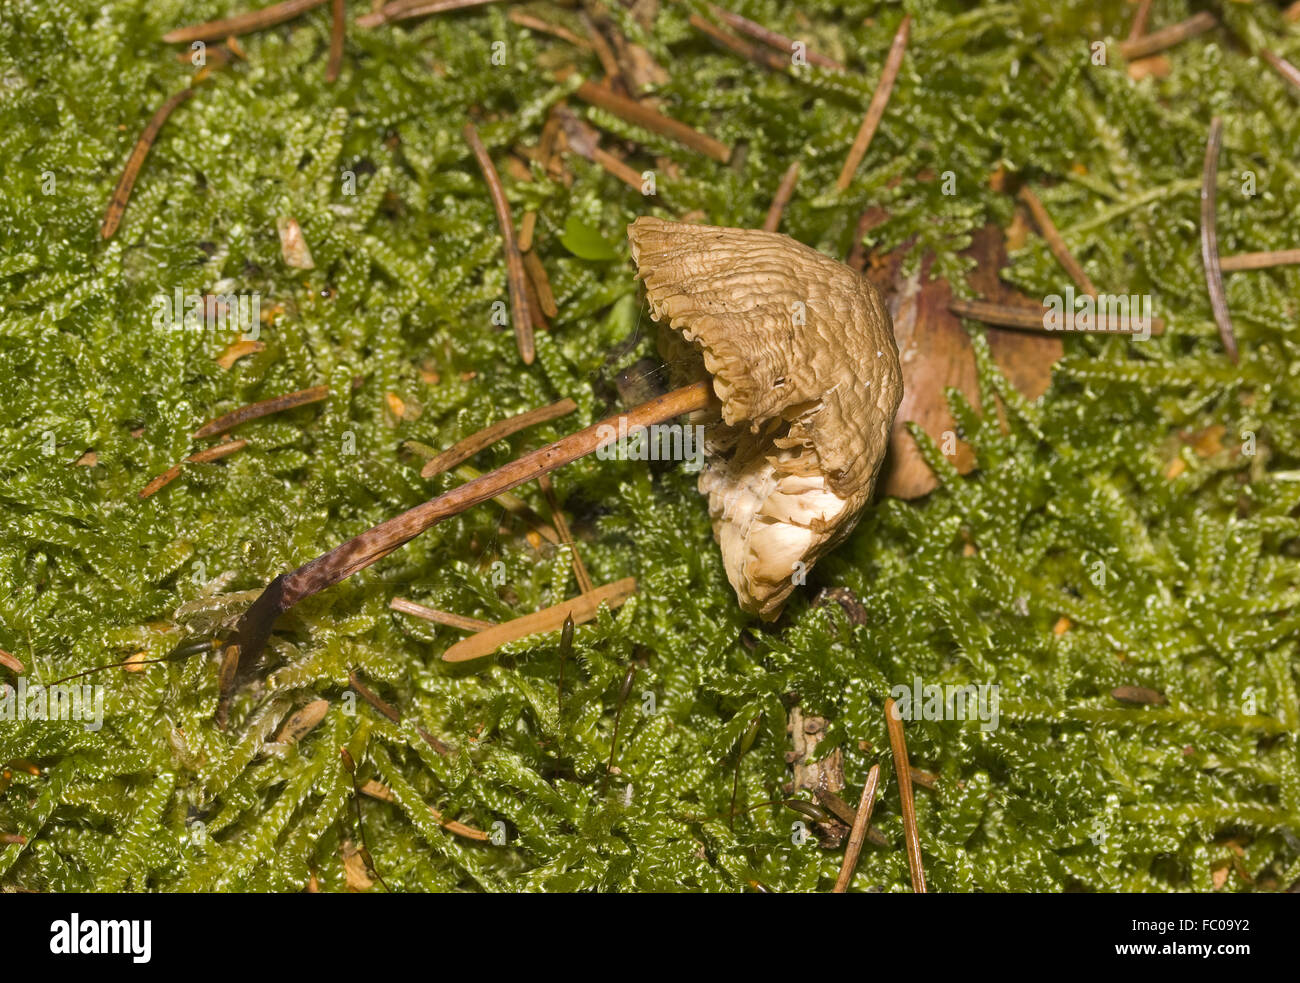 Mushroom in forest moss Stock Photo